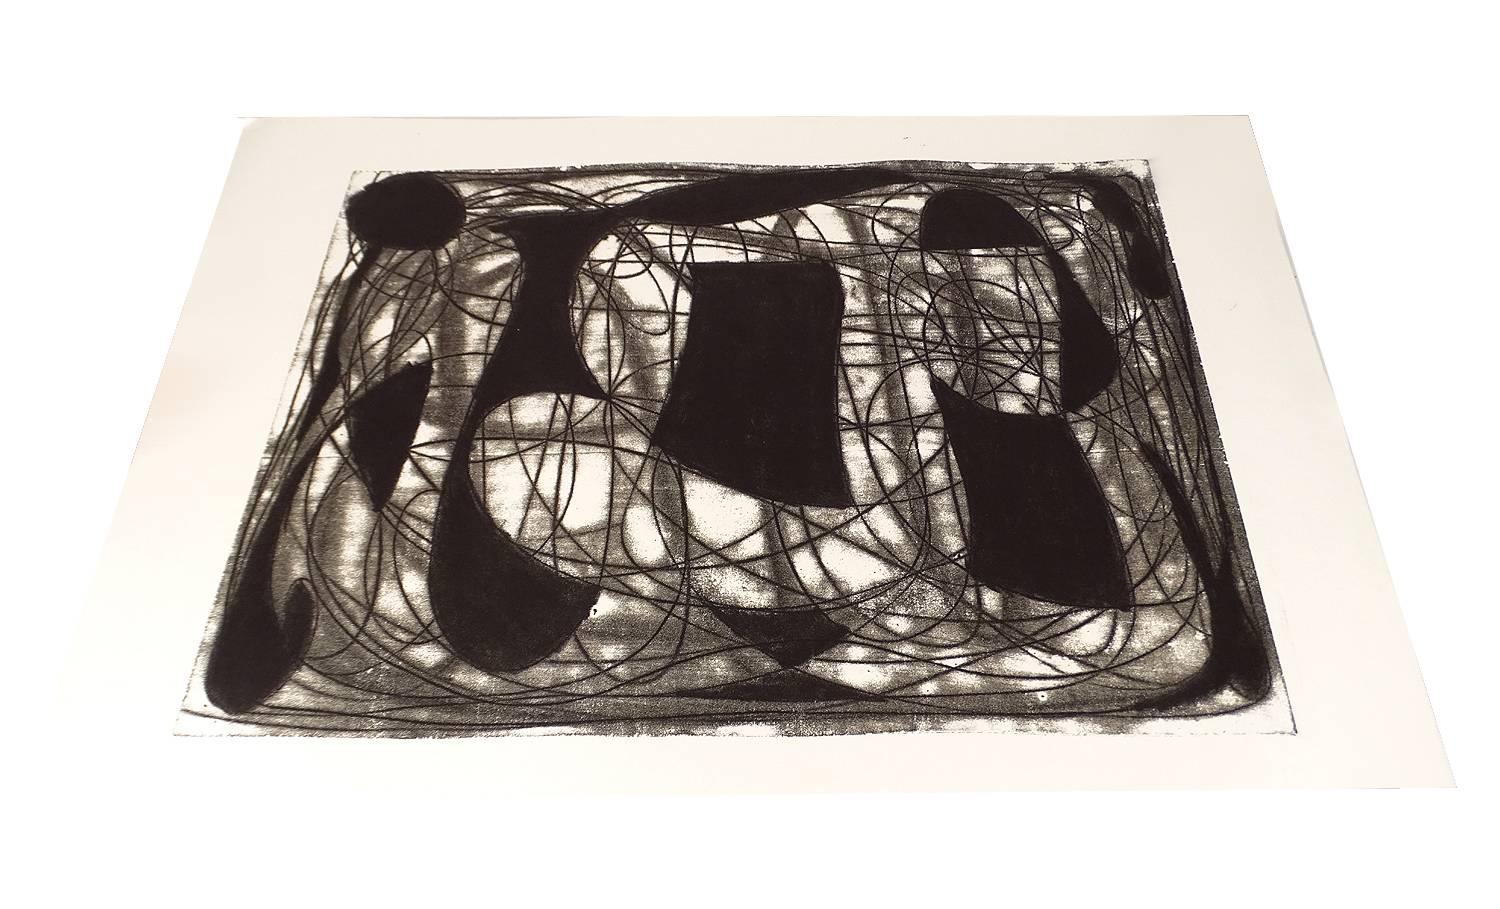 Woodblock abstract lithography on paper by Alwin Carstens (1906-1982), German constructivist Brutalist style, circa 1960s, unusual about these works
is that both faces of the paper are printed, the back side bears a different drawing, the effect